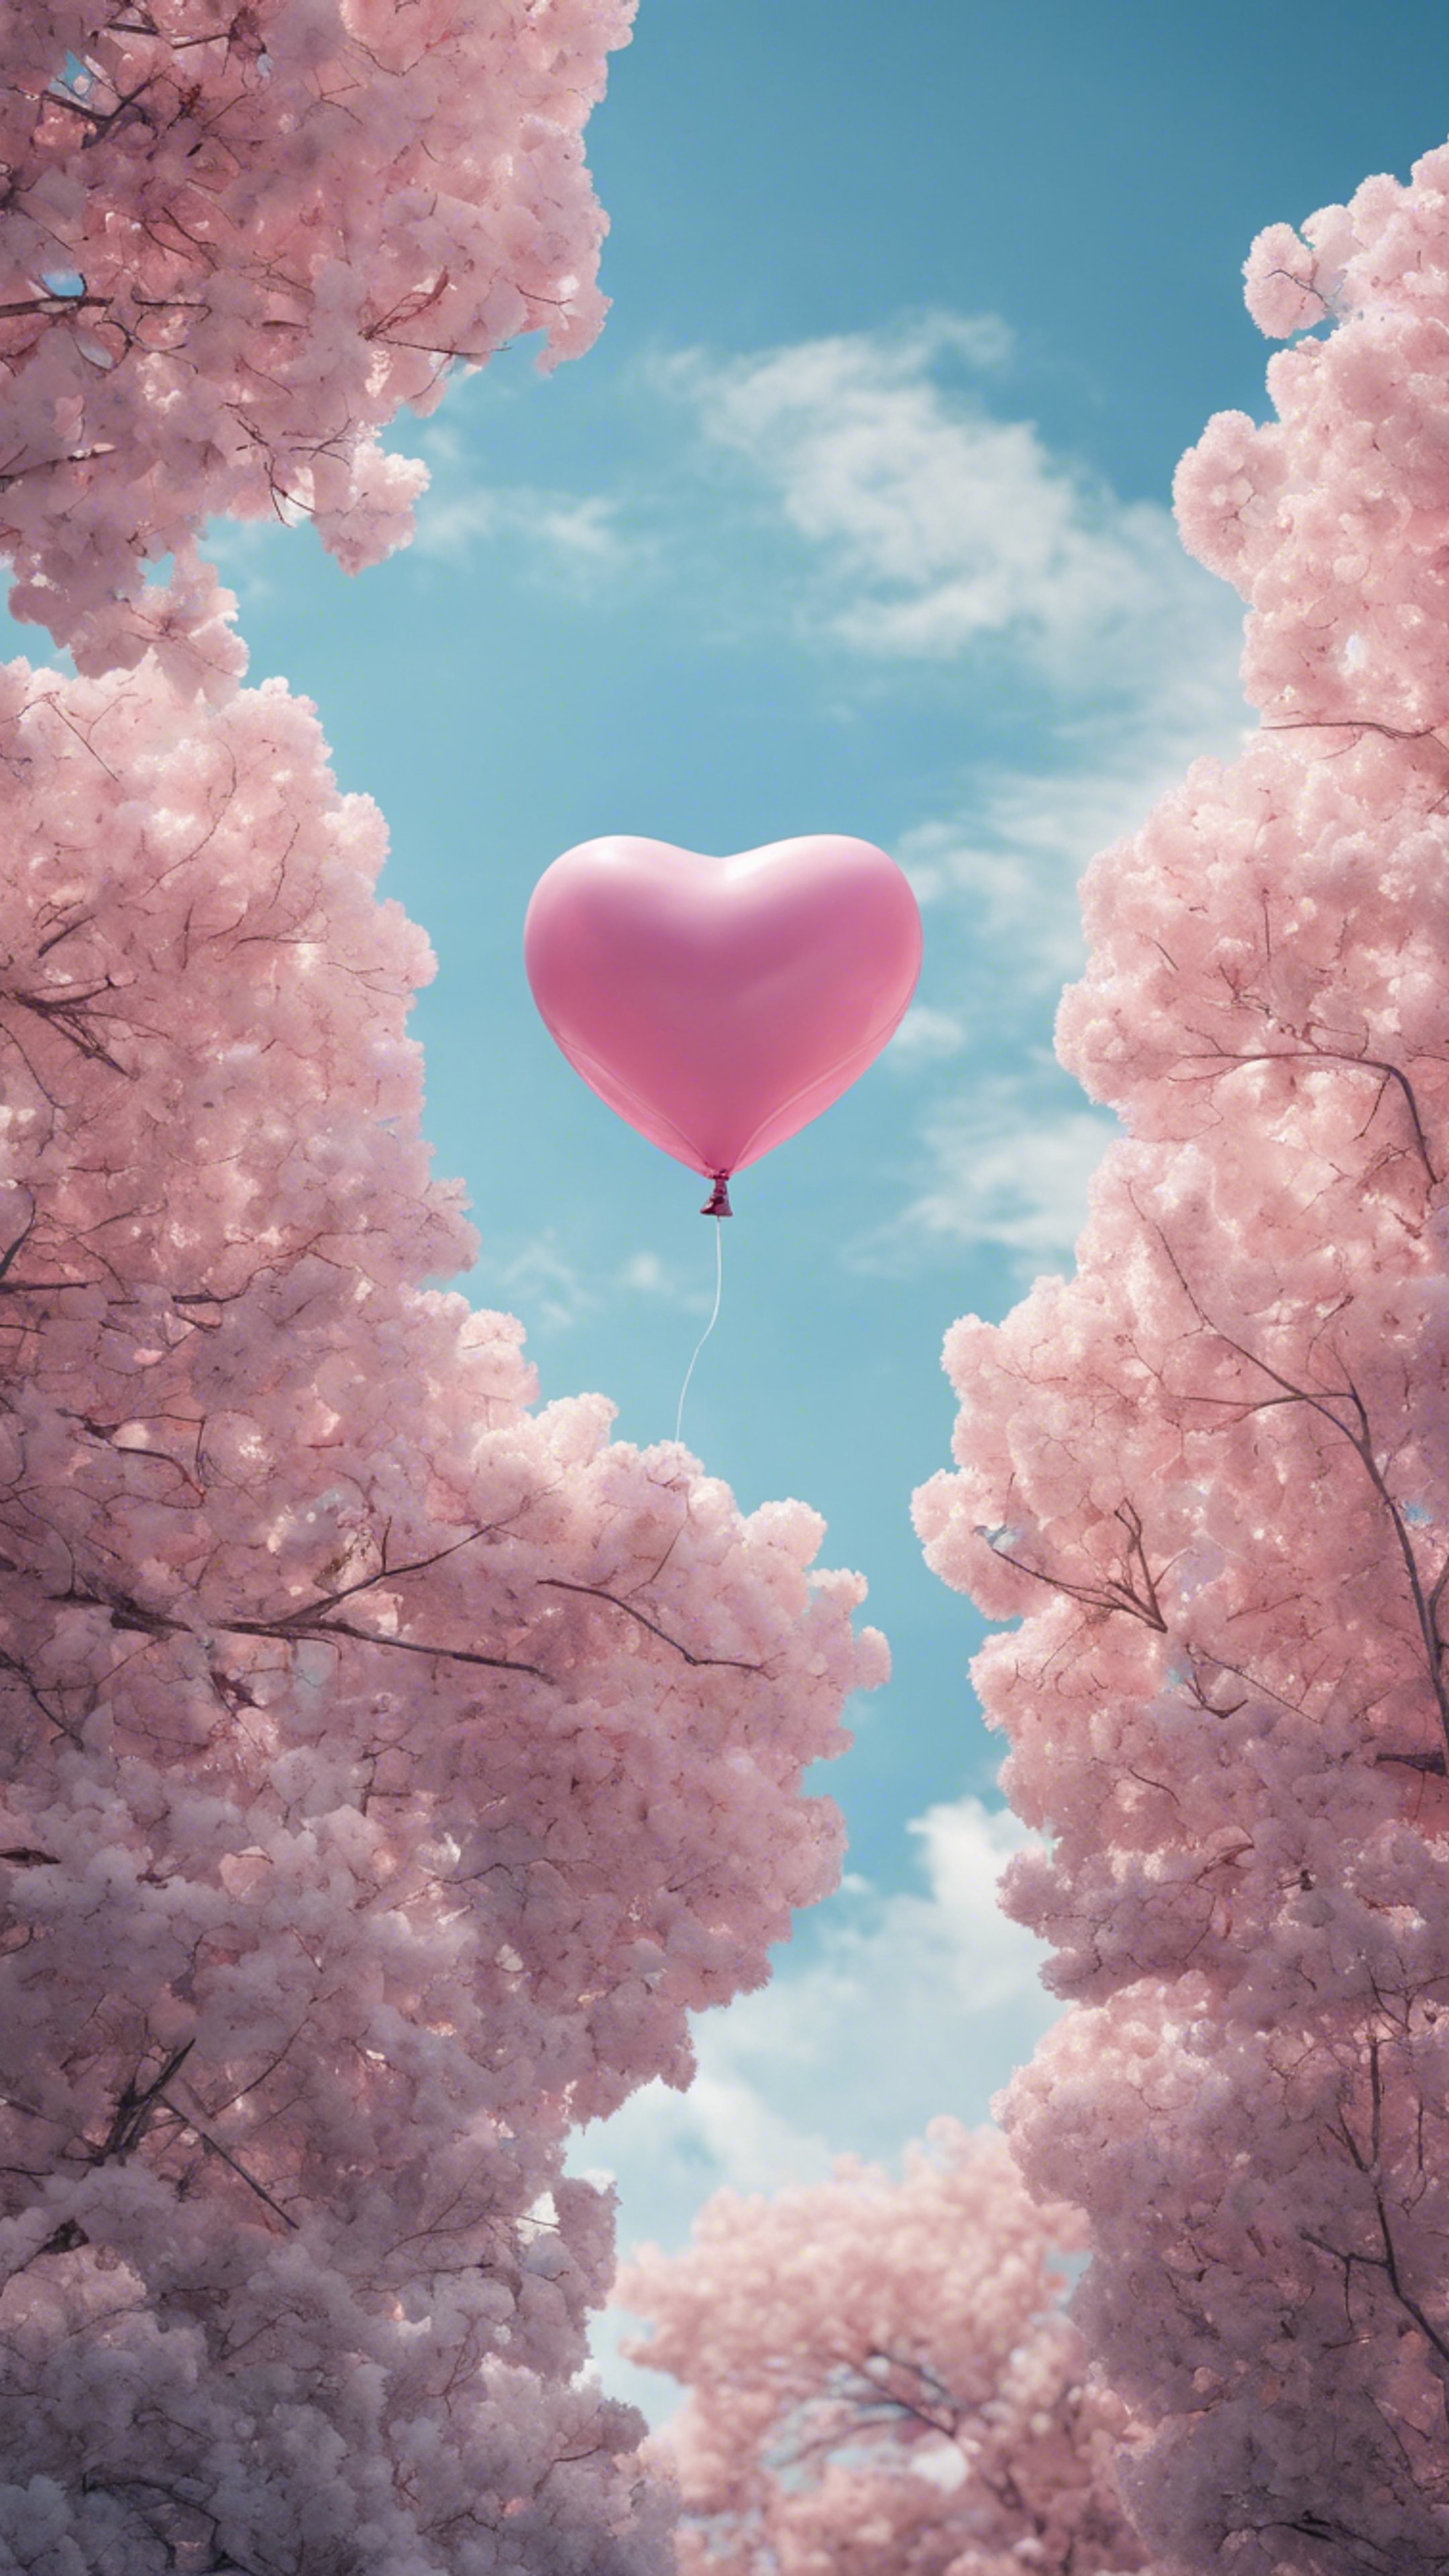 A pink heart-shaped balloon floating in the blue sky. Ταπετσαρία[cd7c71404dc64bc7bb7c]